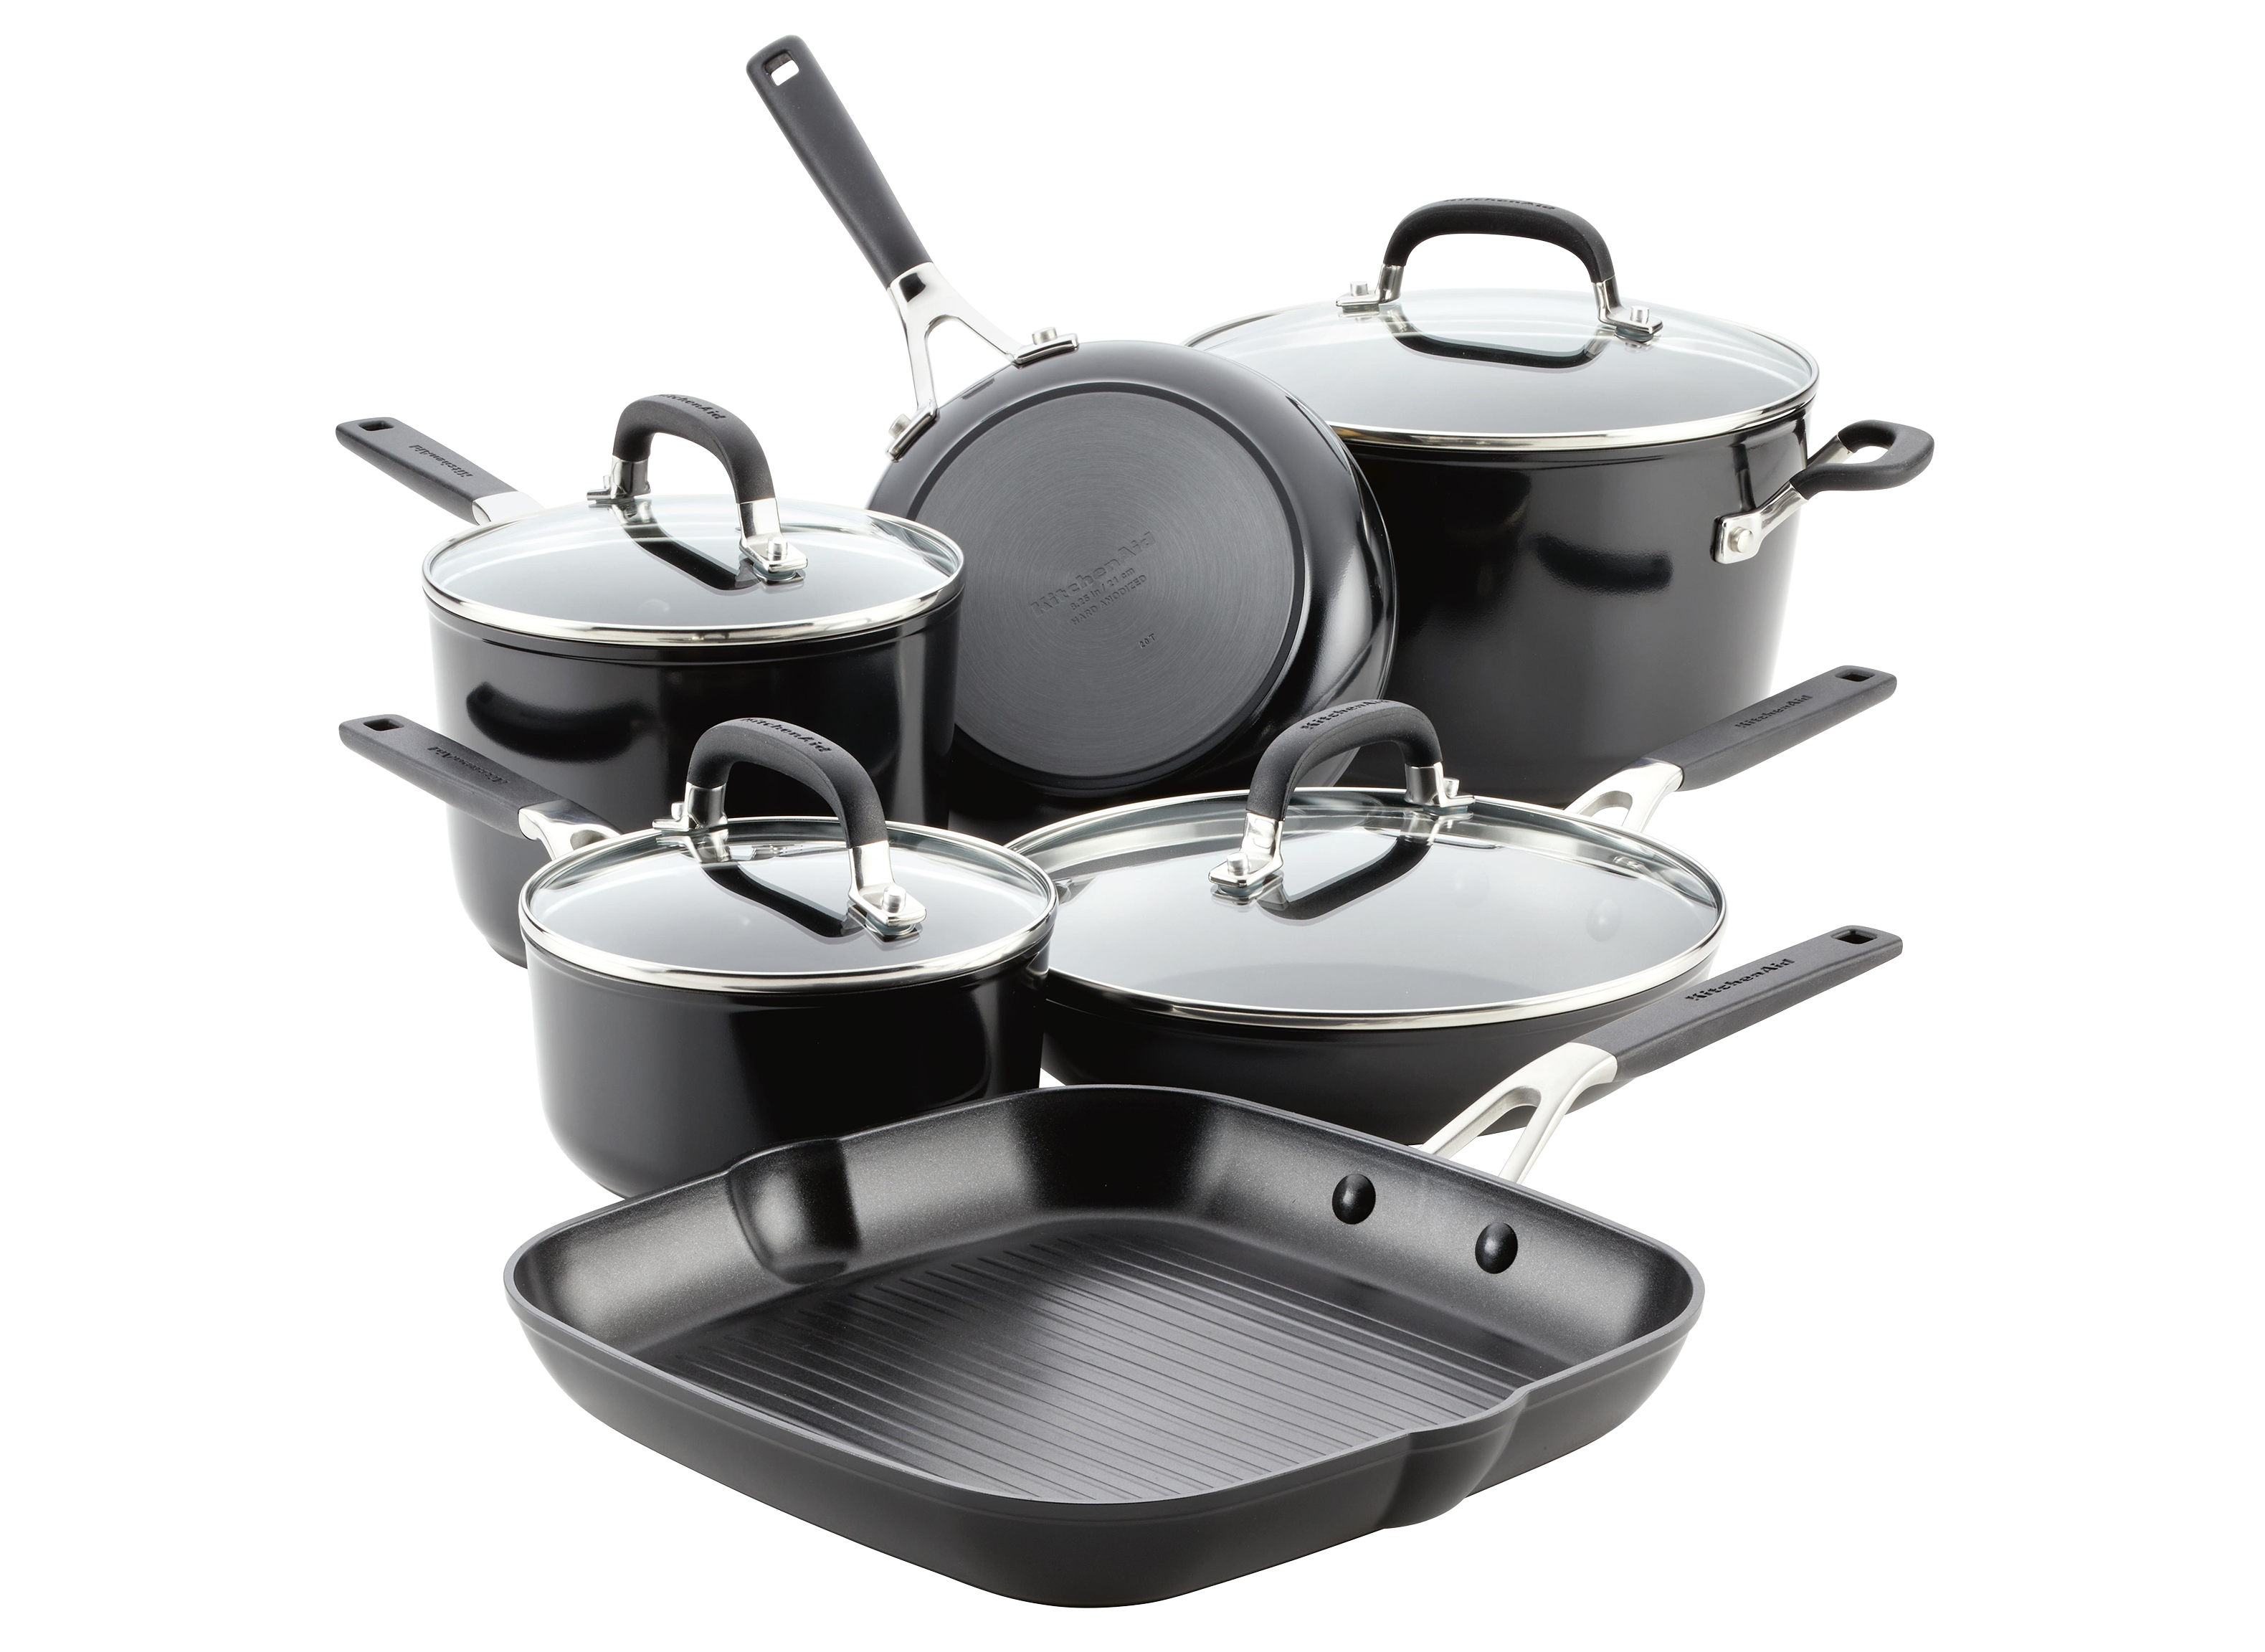 10 Hard-Anodized Induction Fry Pan with Lid (Nonstick), KitchenAid  Non-Electrics